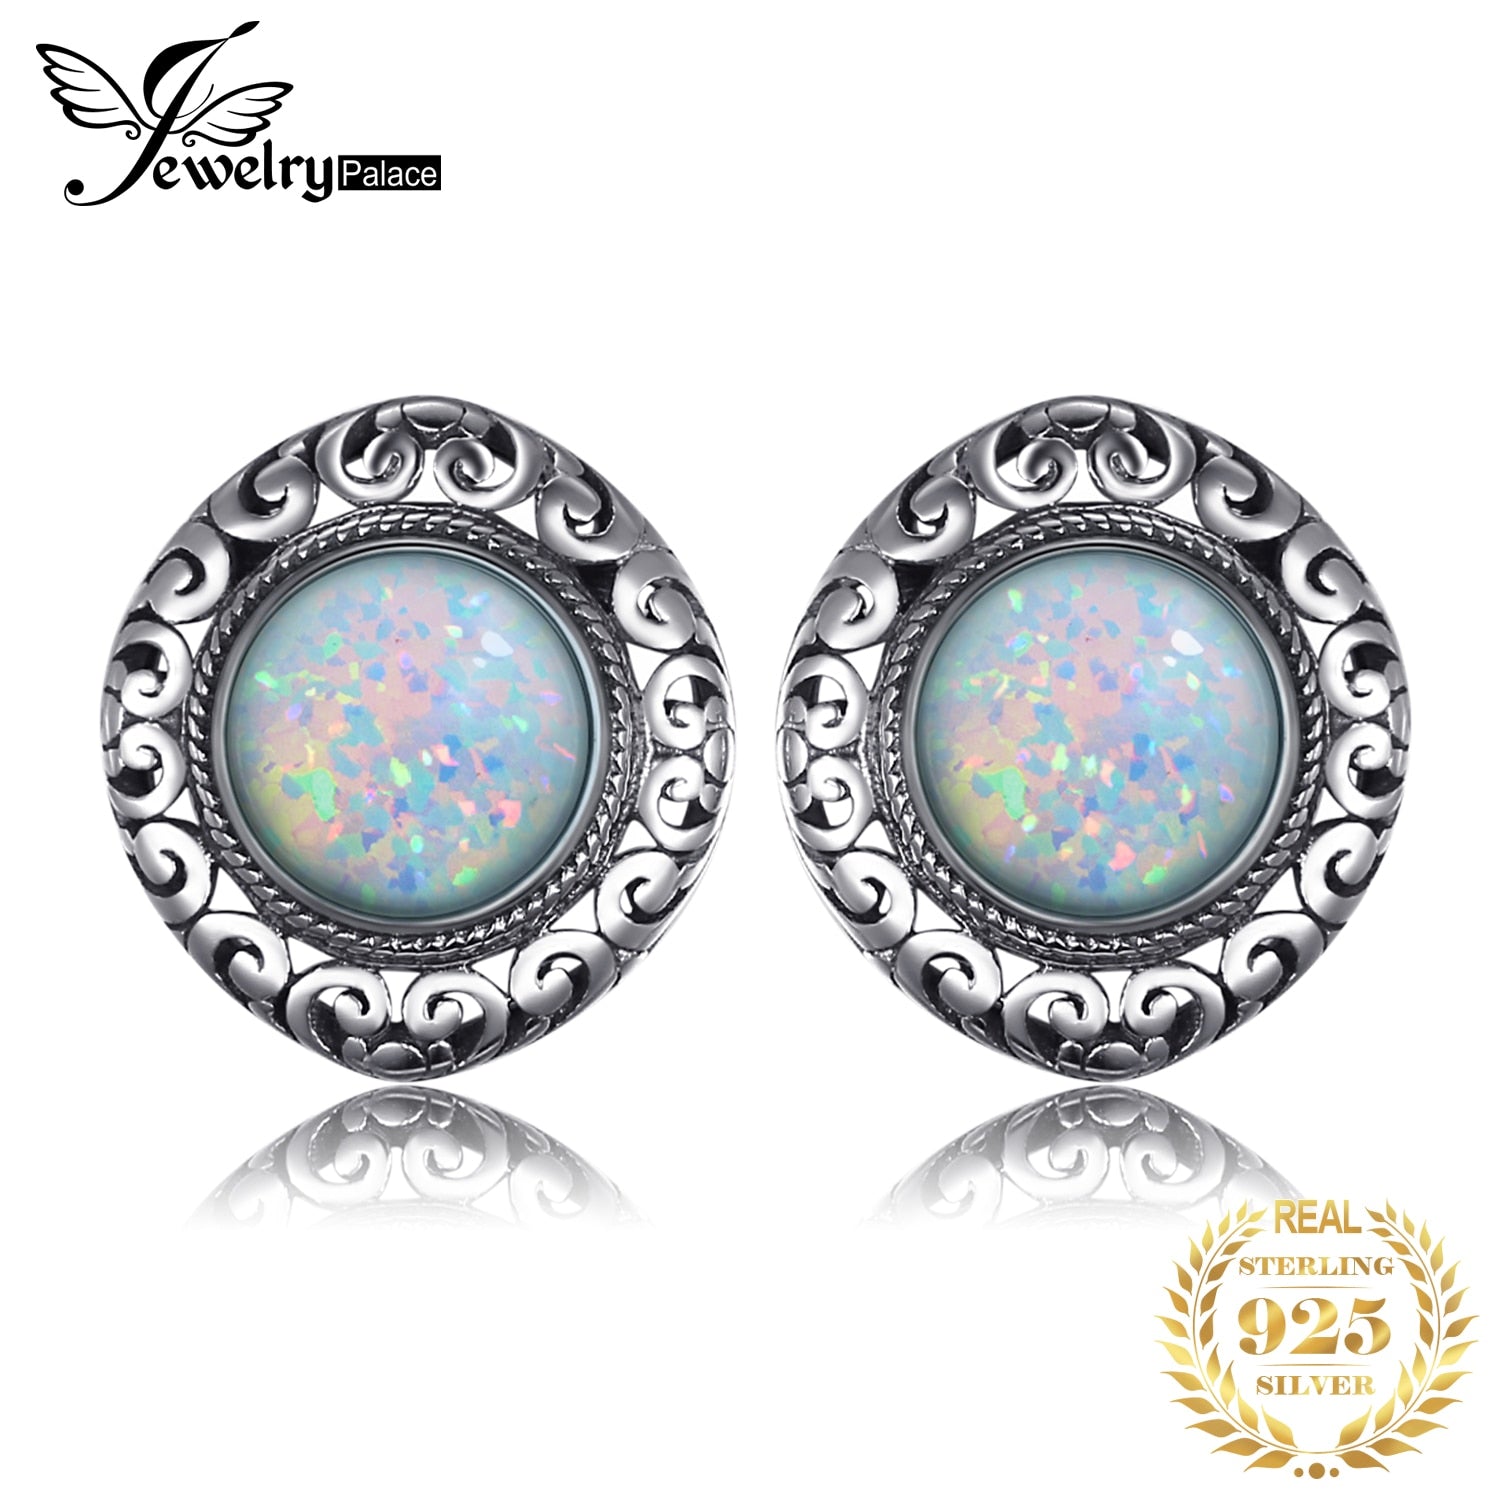 Jewelry Palace Vintage 2.5ct Cabochon Created Opal 925 Sterling Silver Stud Earrings for Women Hollow Heart Gemstone Earrings Default Title